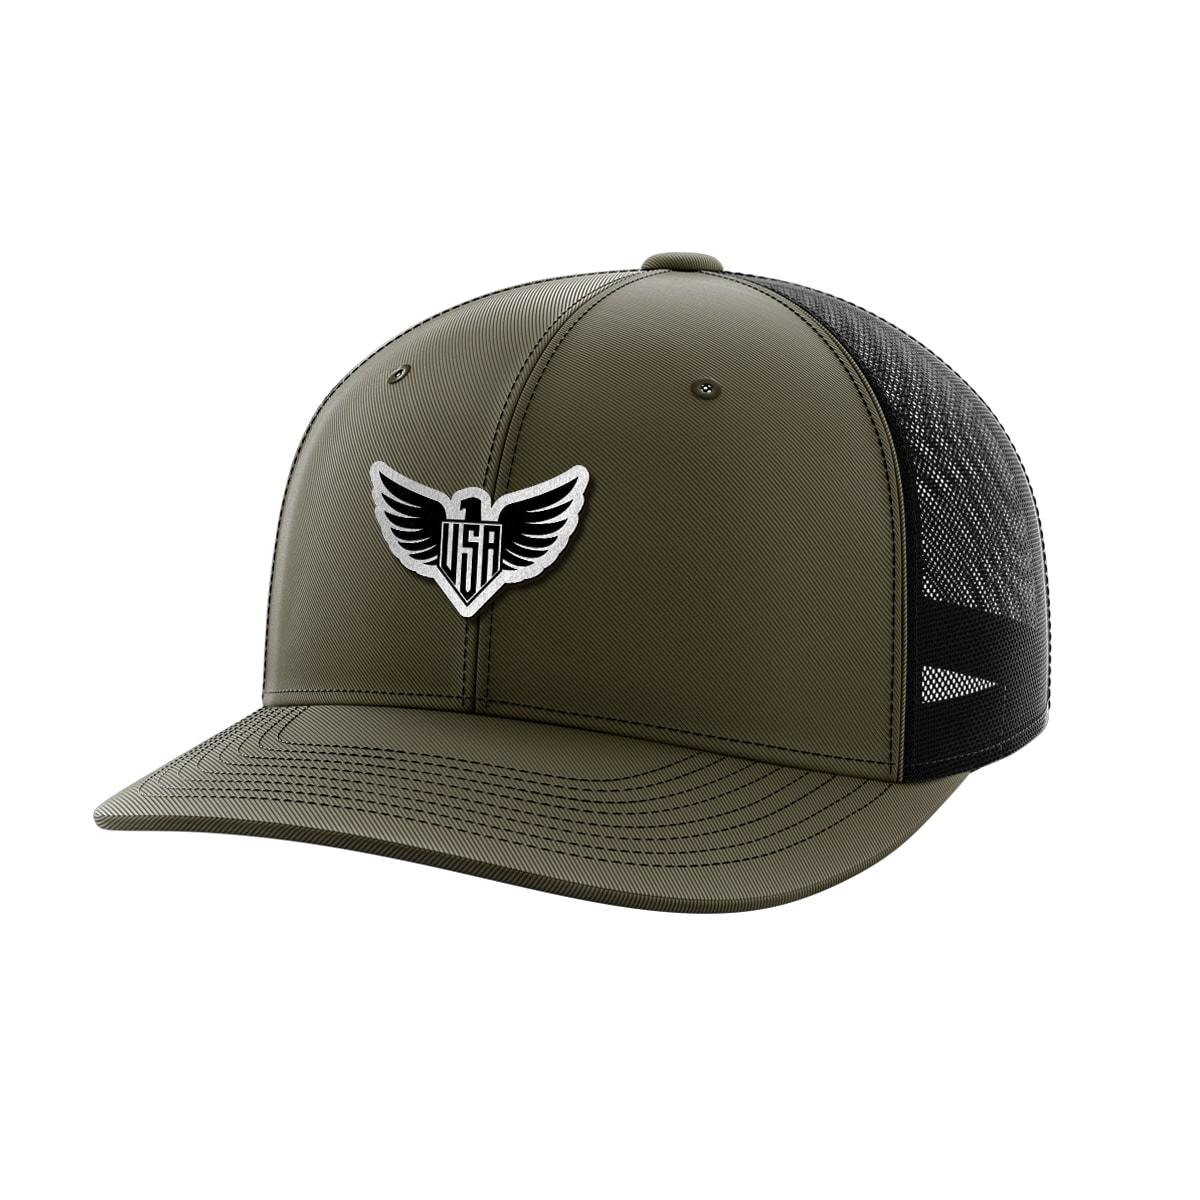 Thumbnail for Eagle USA Patch Hat - Greater Half